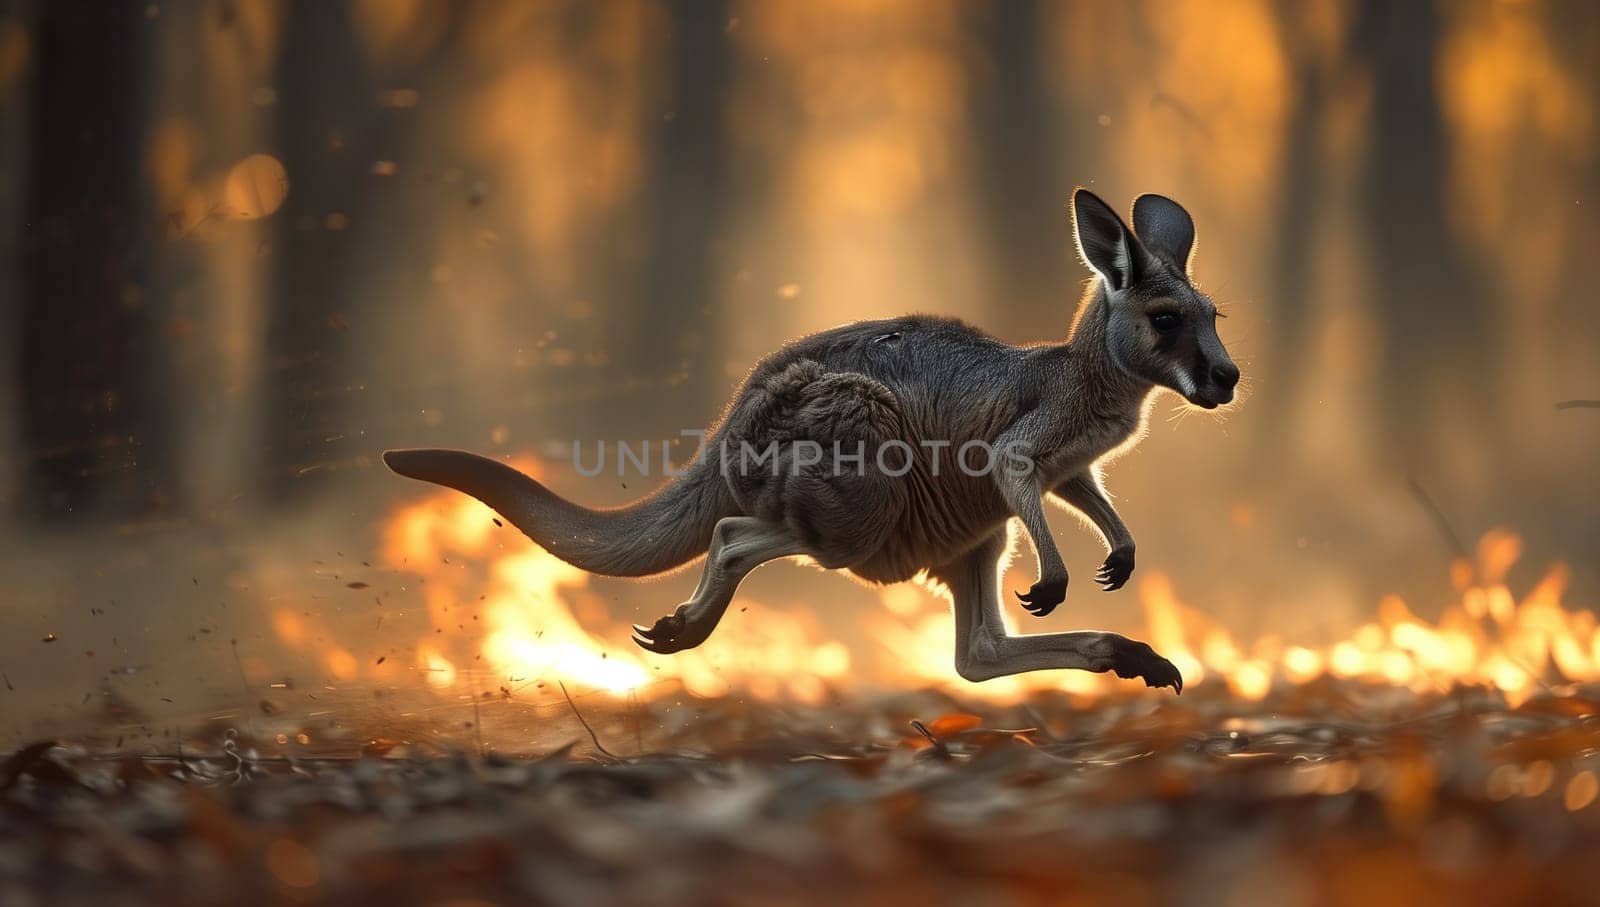 A terrestrial animal with adaptation for hopping, the kangaroo, is navigating through a forest fire in darkness. An event reminiscent of the extinction of dinosaurs captured in macro photography